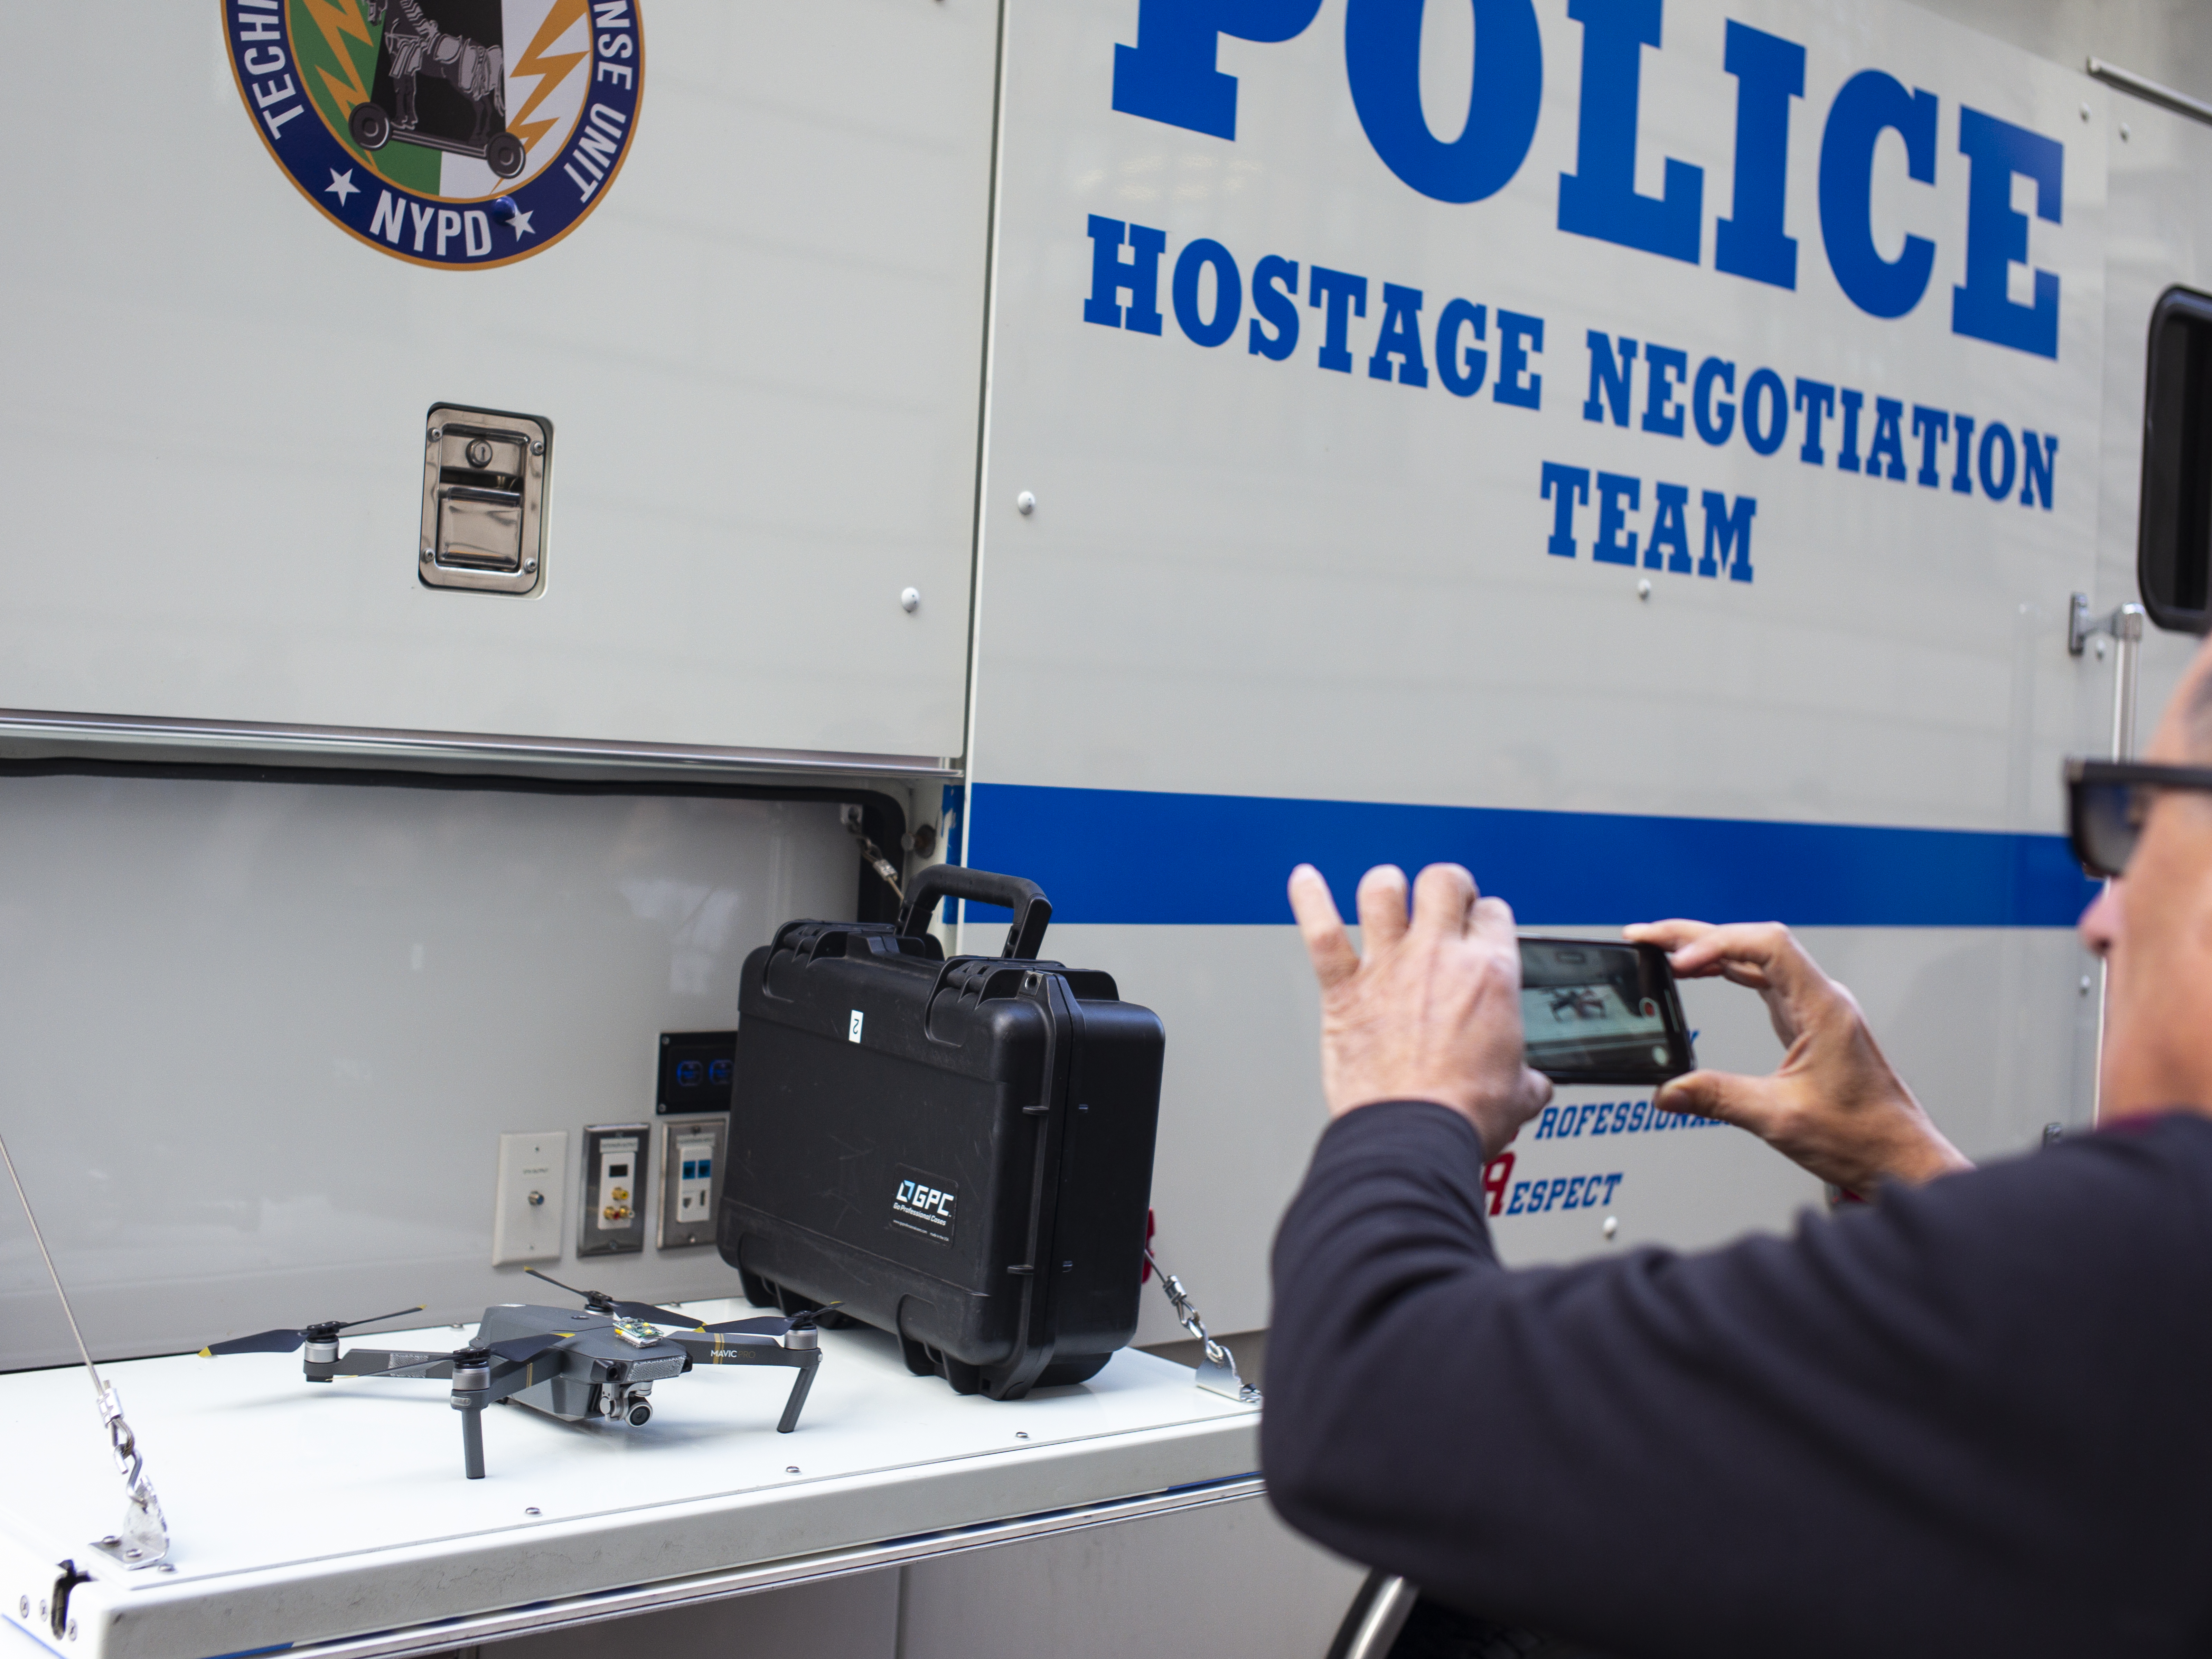 A drone used by the NYPD during a 2019 hostage situation.